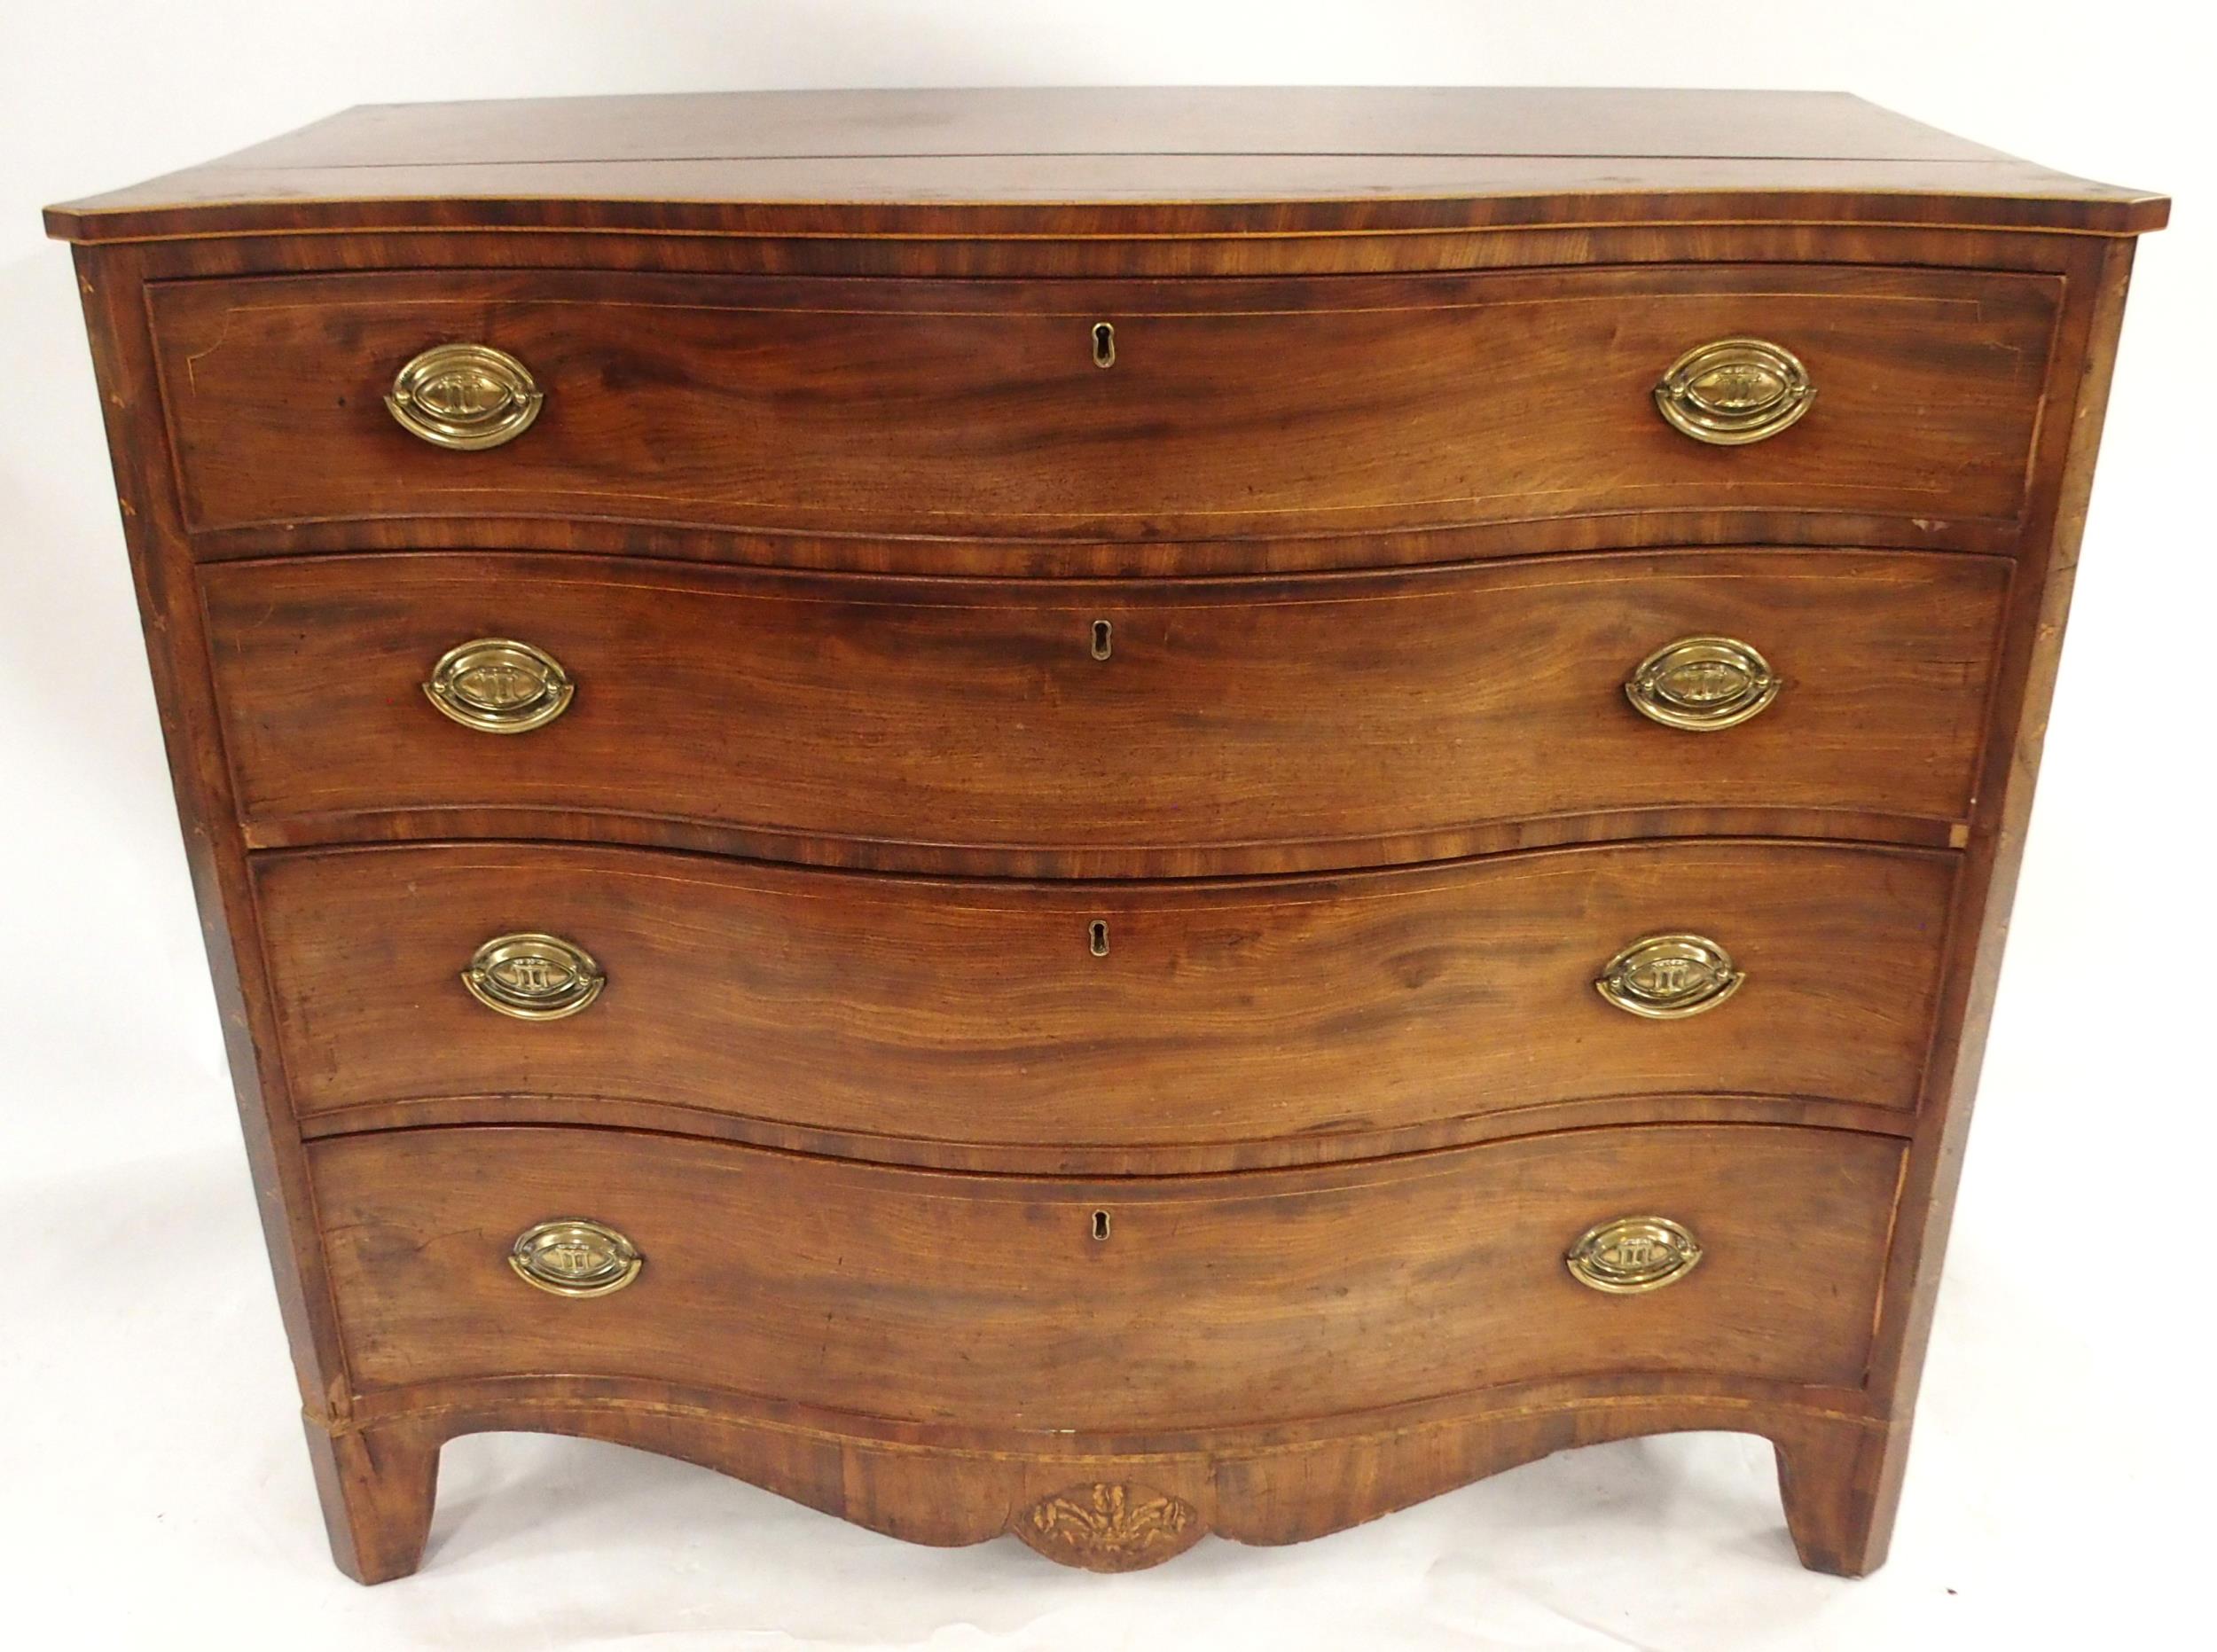 A GEORGIAN MAHOGANY SERPENTINE FRONT CHEST OF FOUR DRAWERS with satinwood inlays to sides and